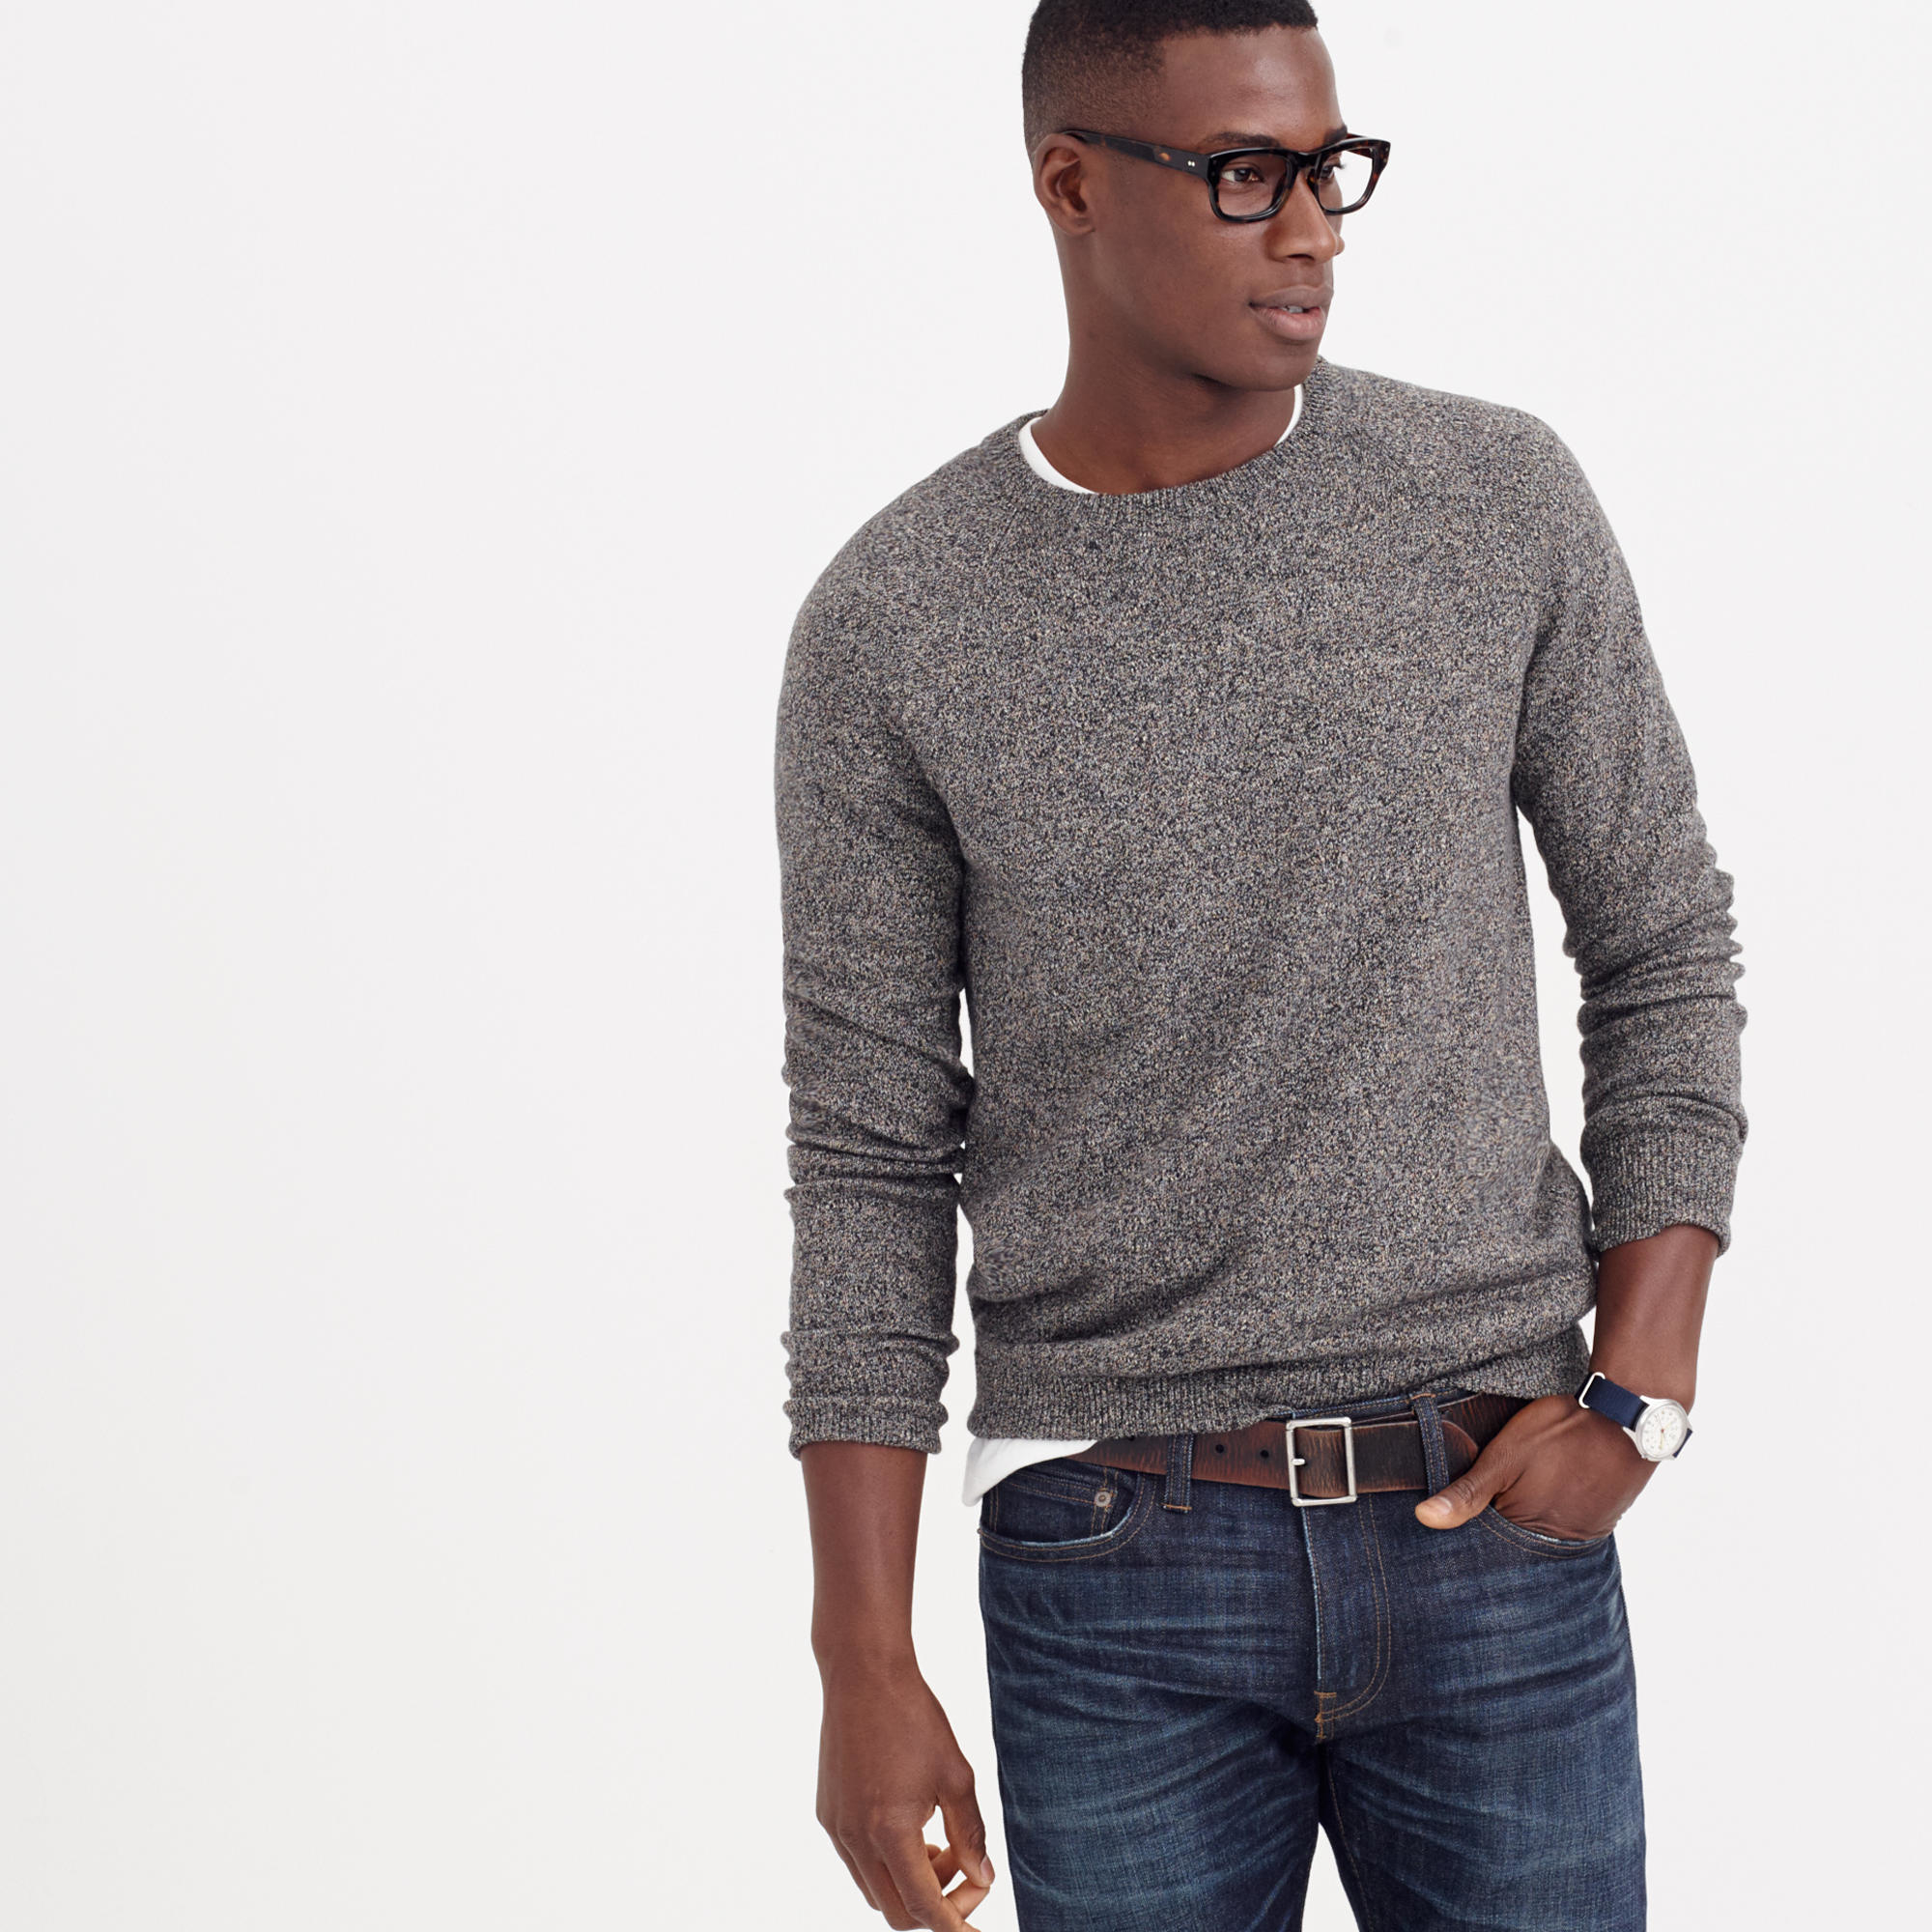 J.Crew Marled Cotton Sweater in Gray for Men - Lyst